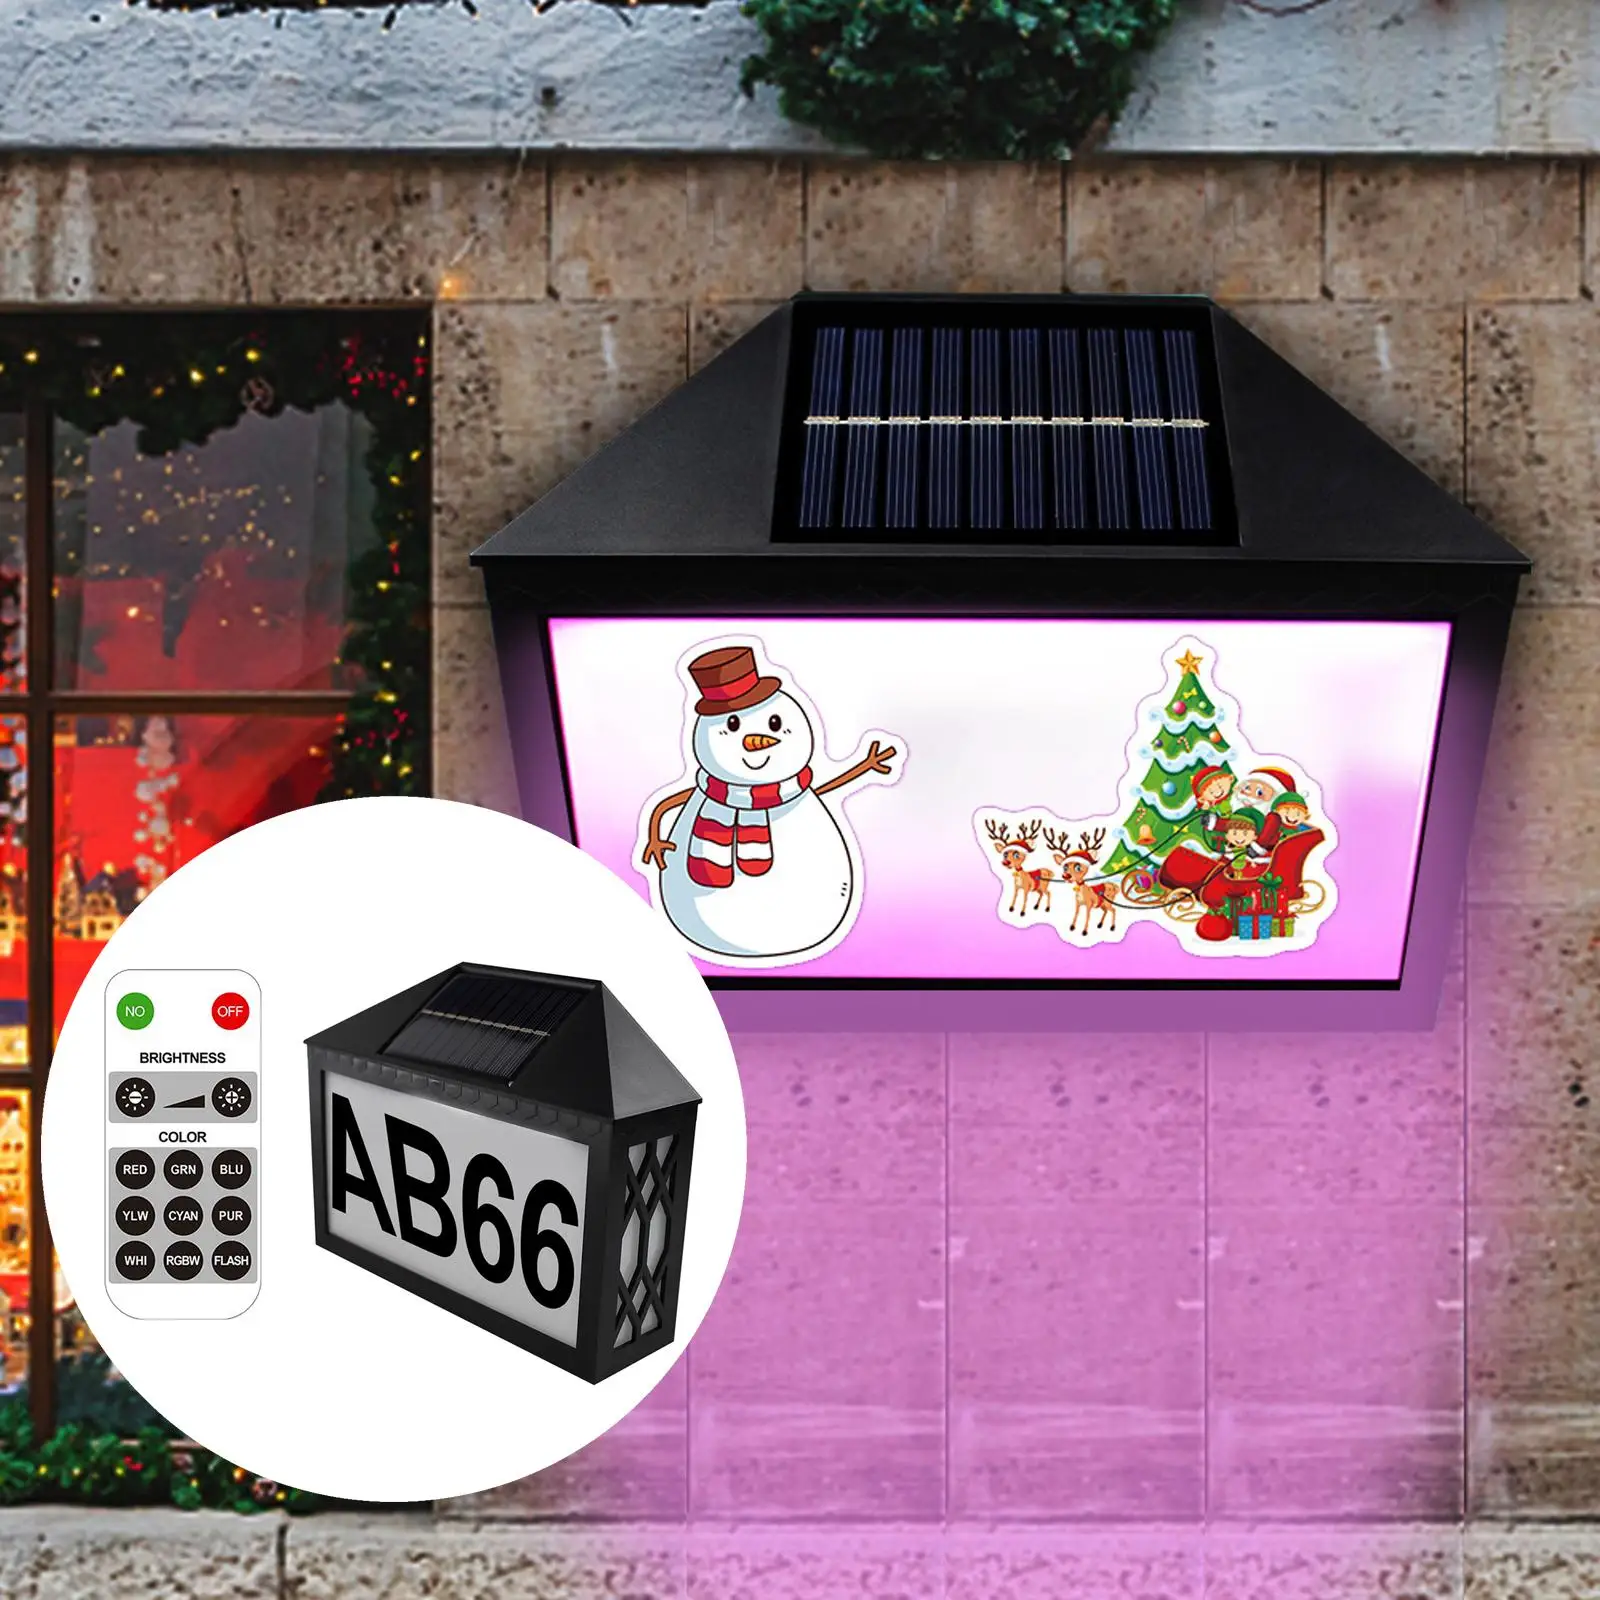  Plaque, Solar Powered LED Light Address Number Signs, Waterproof  for  Outdoor Street Outside Wall Lamp